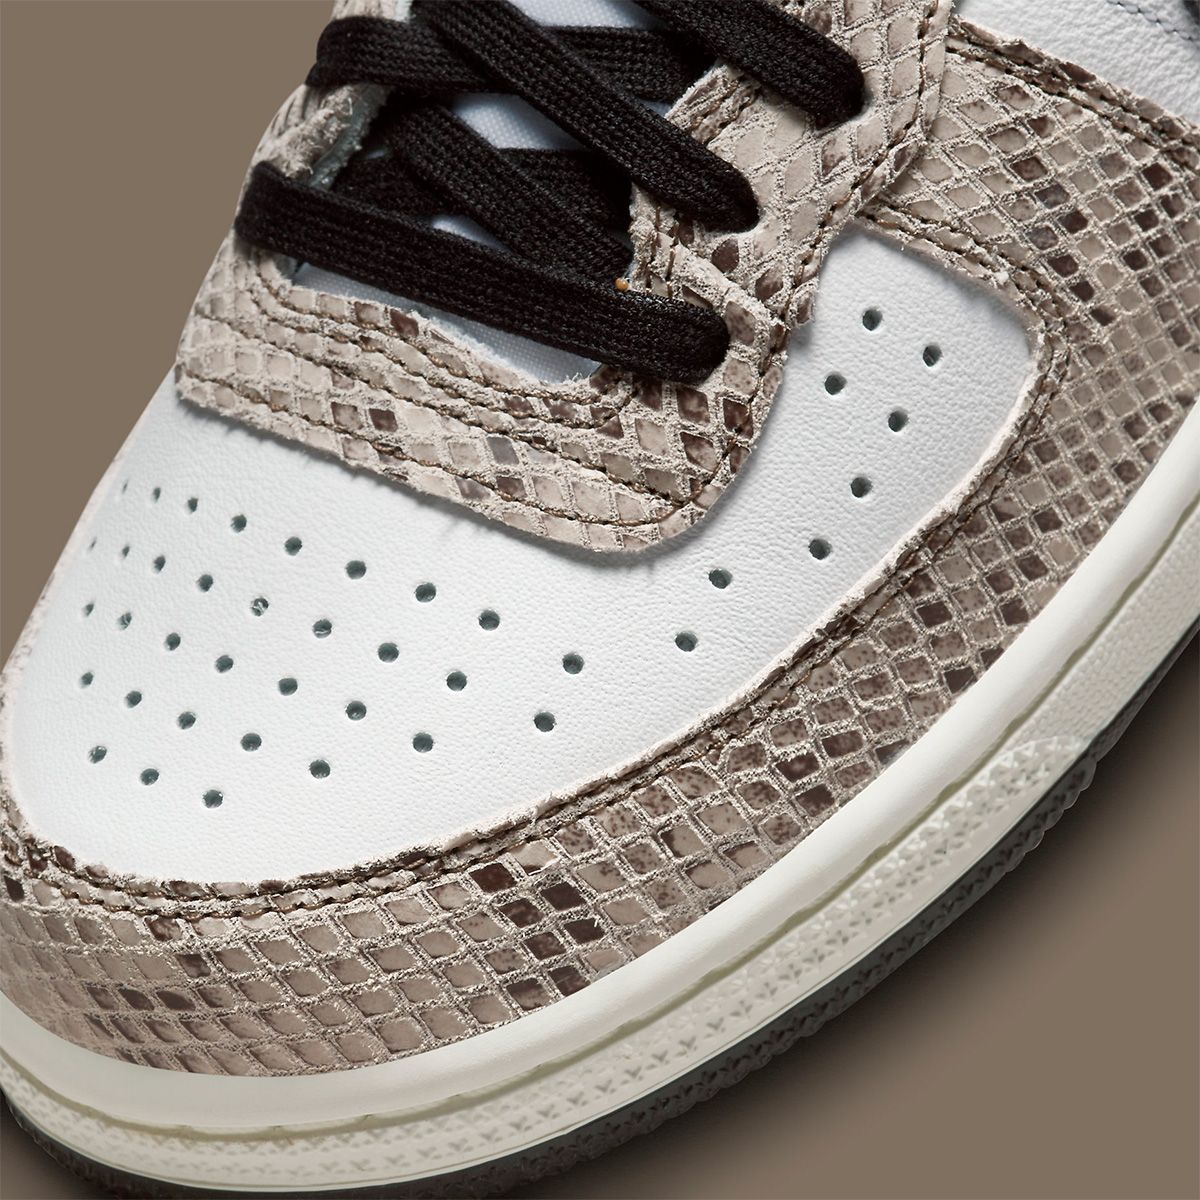 Nike Terminator High “Cocoa Snake” Channels a Classic Air Force 1 Low |  House of Heat°